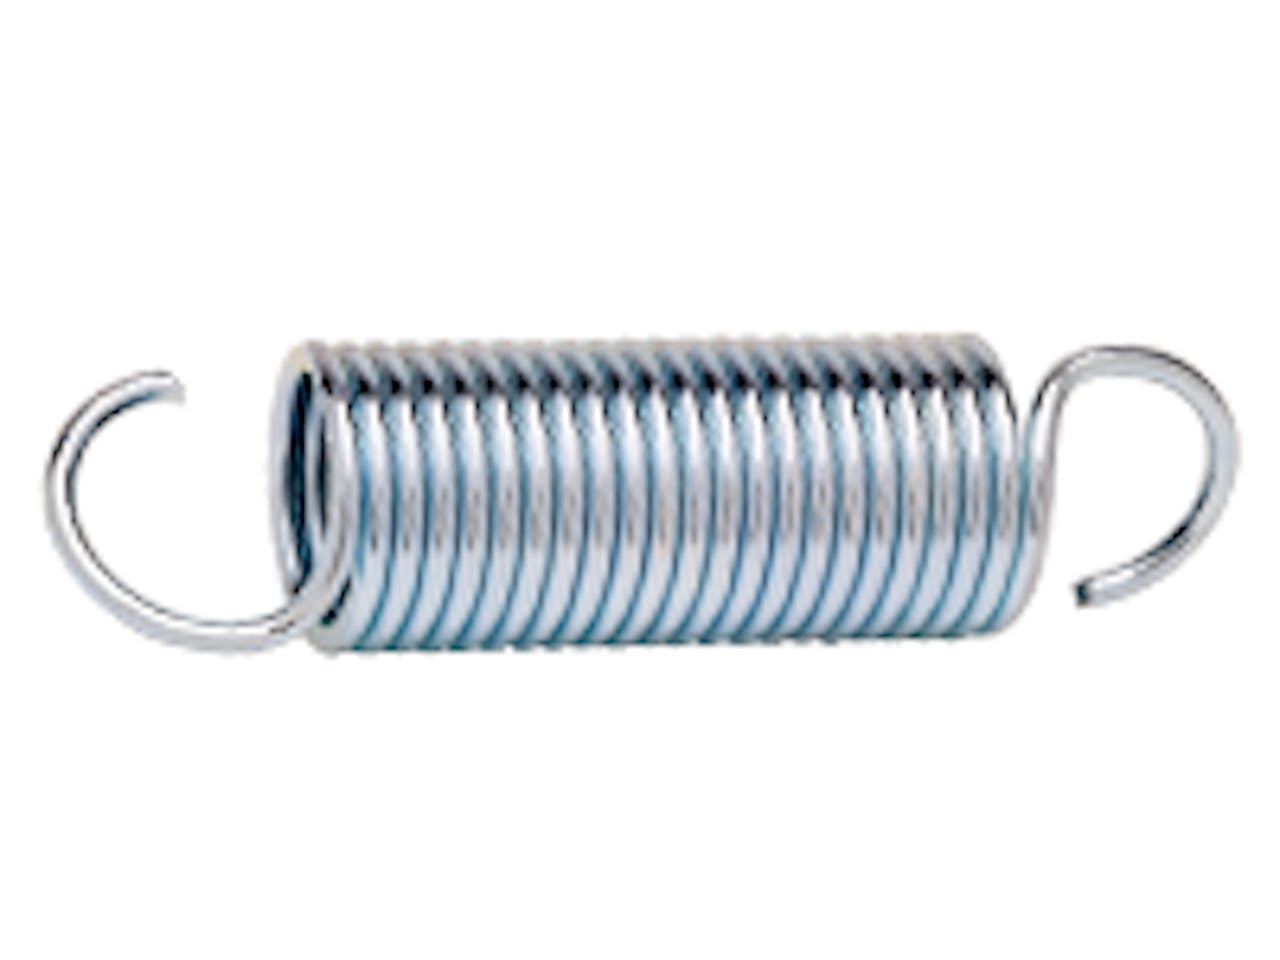 Extension spring from Fox Valley